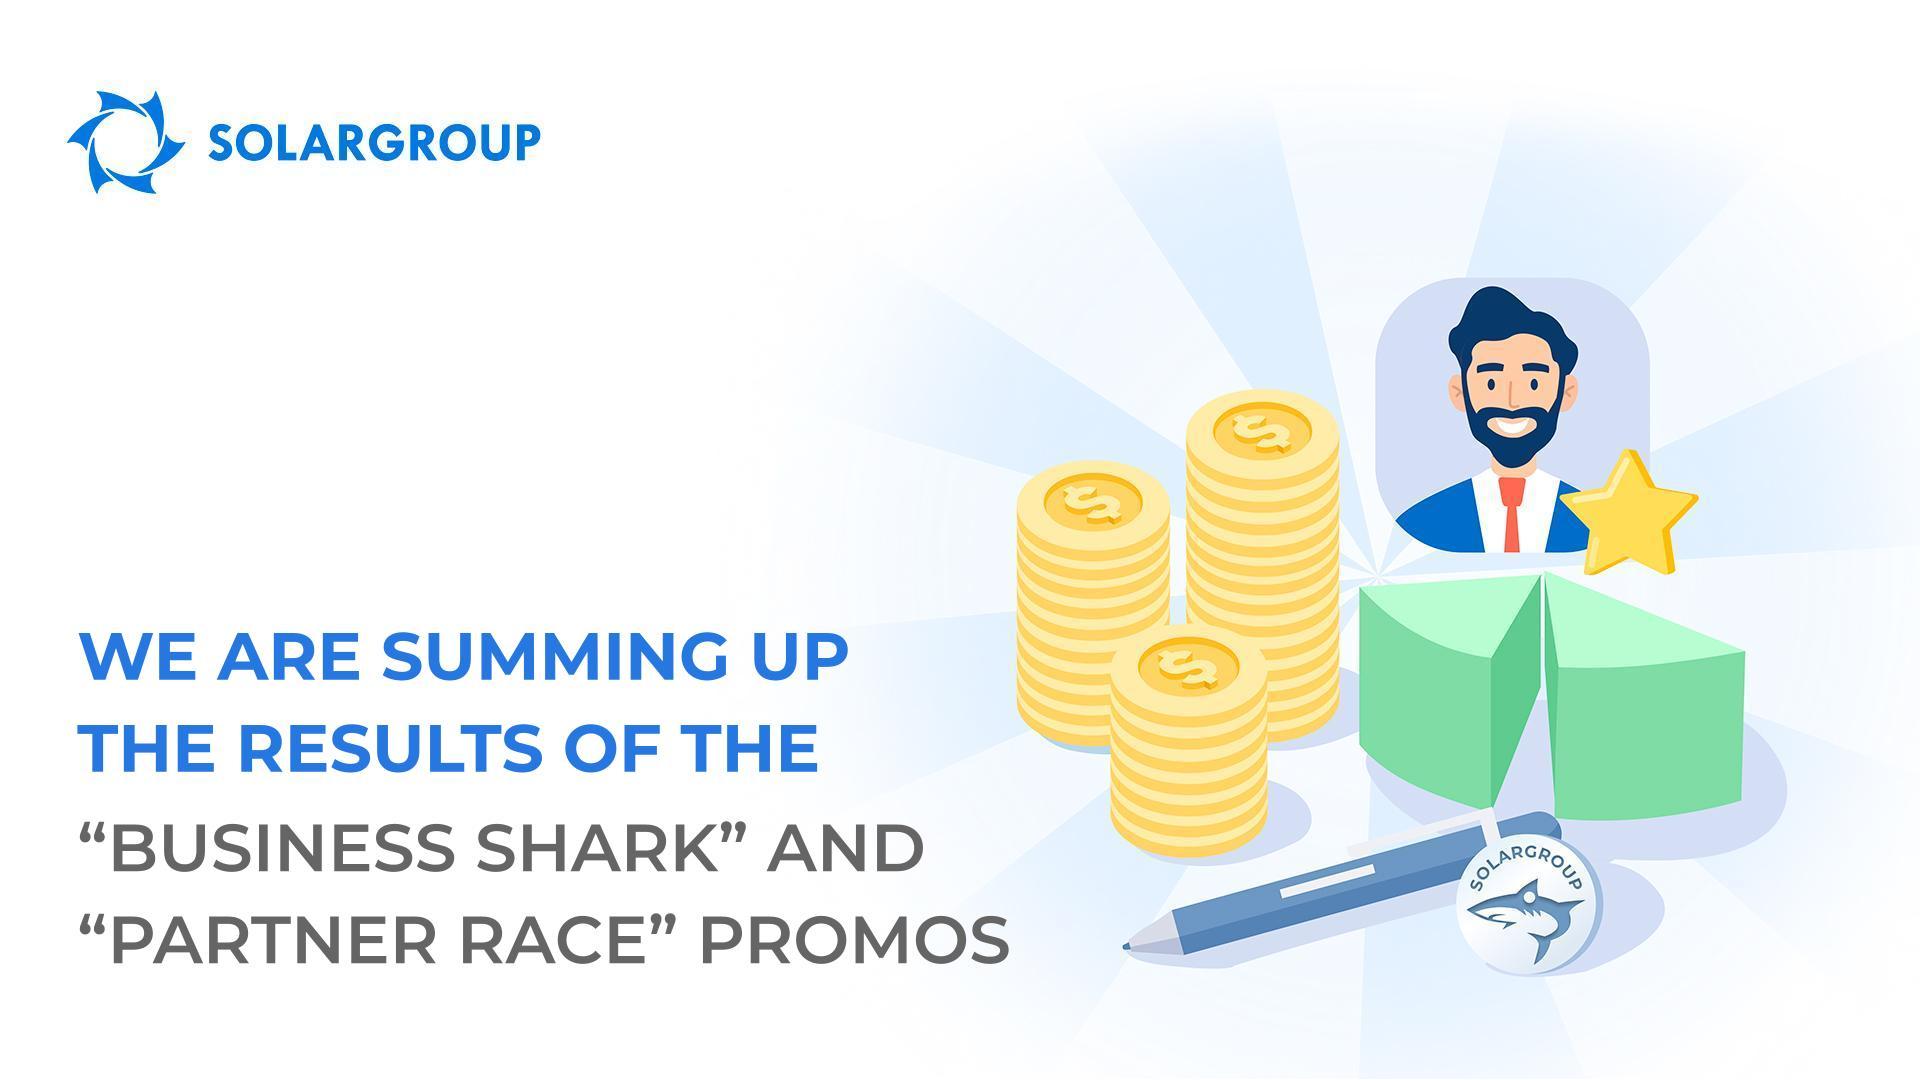 We are summing up the results of the "Business Shark" and "Partner Race" promotions!